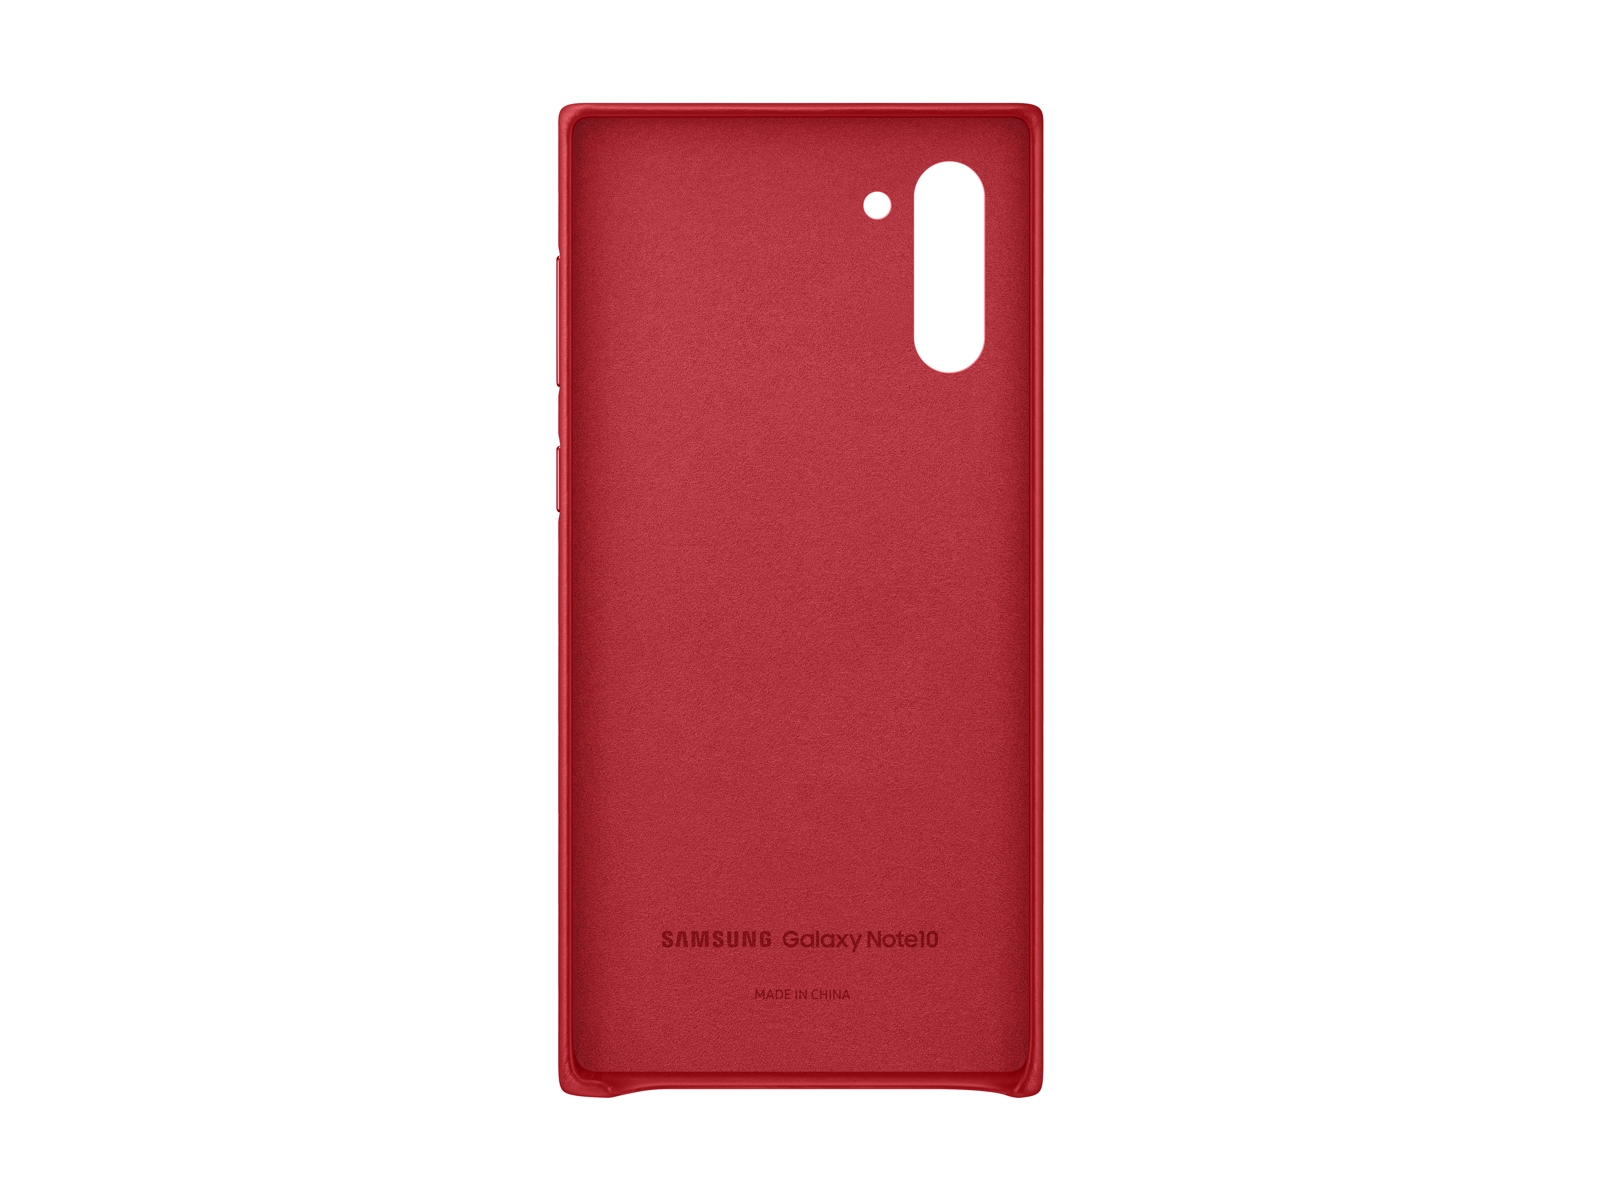 Thumbnail image of Galaxy Note10 Leather Back Cover, Red